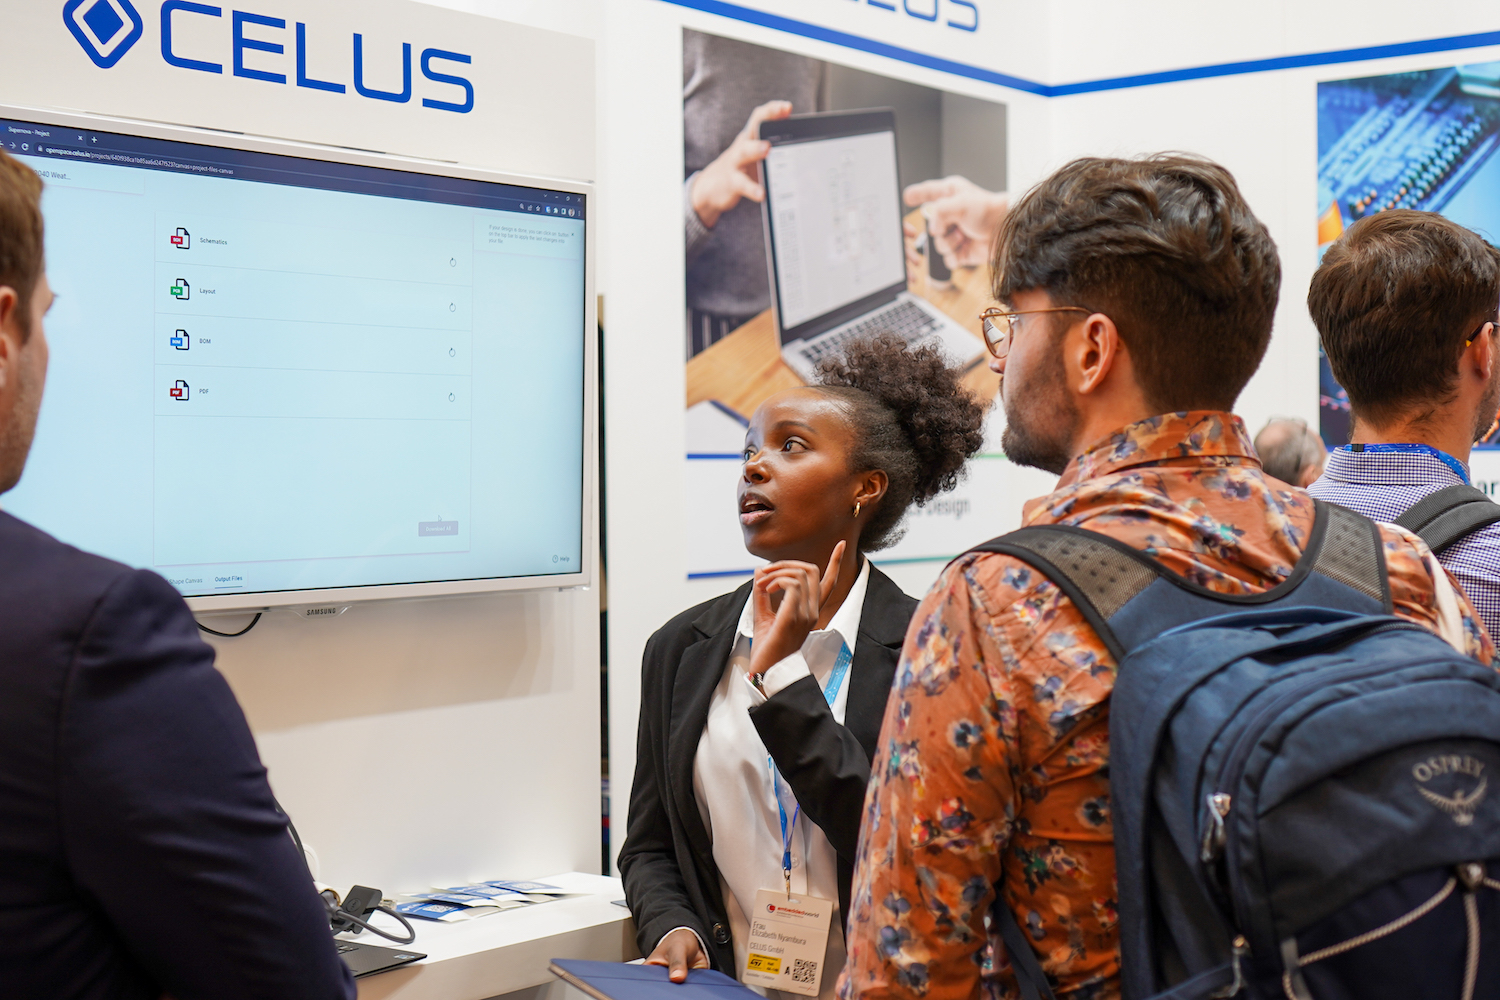 embedded world: A Perfect Event for the CELUS Open Space Go-Live